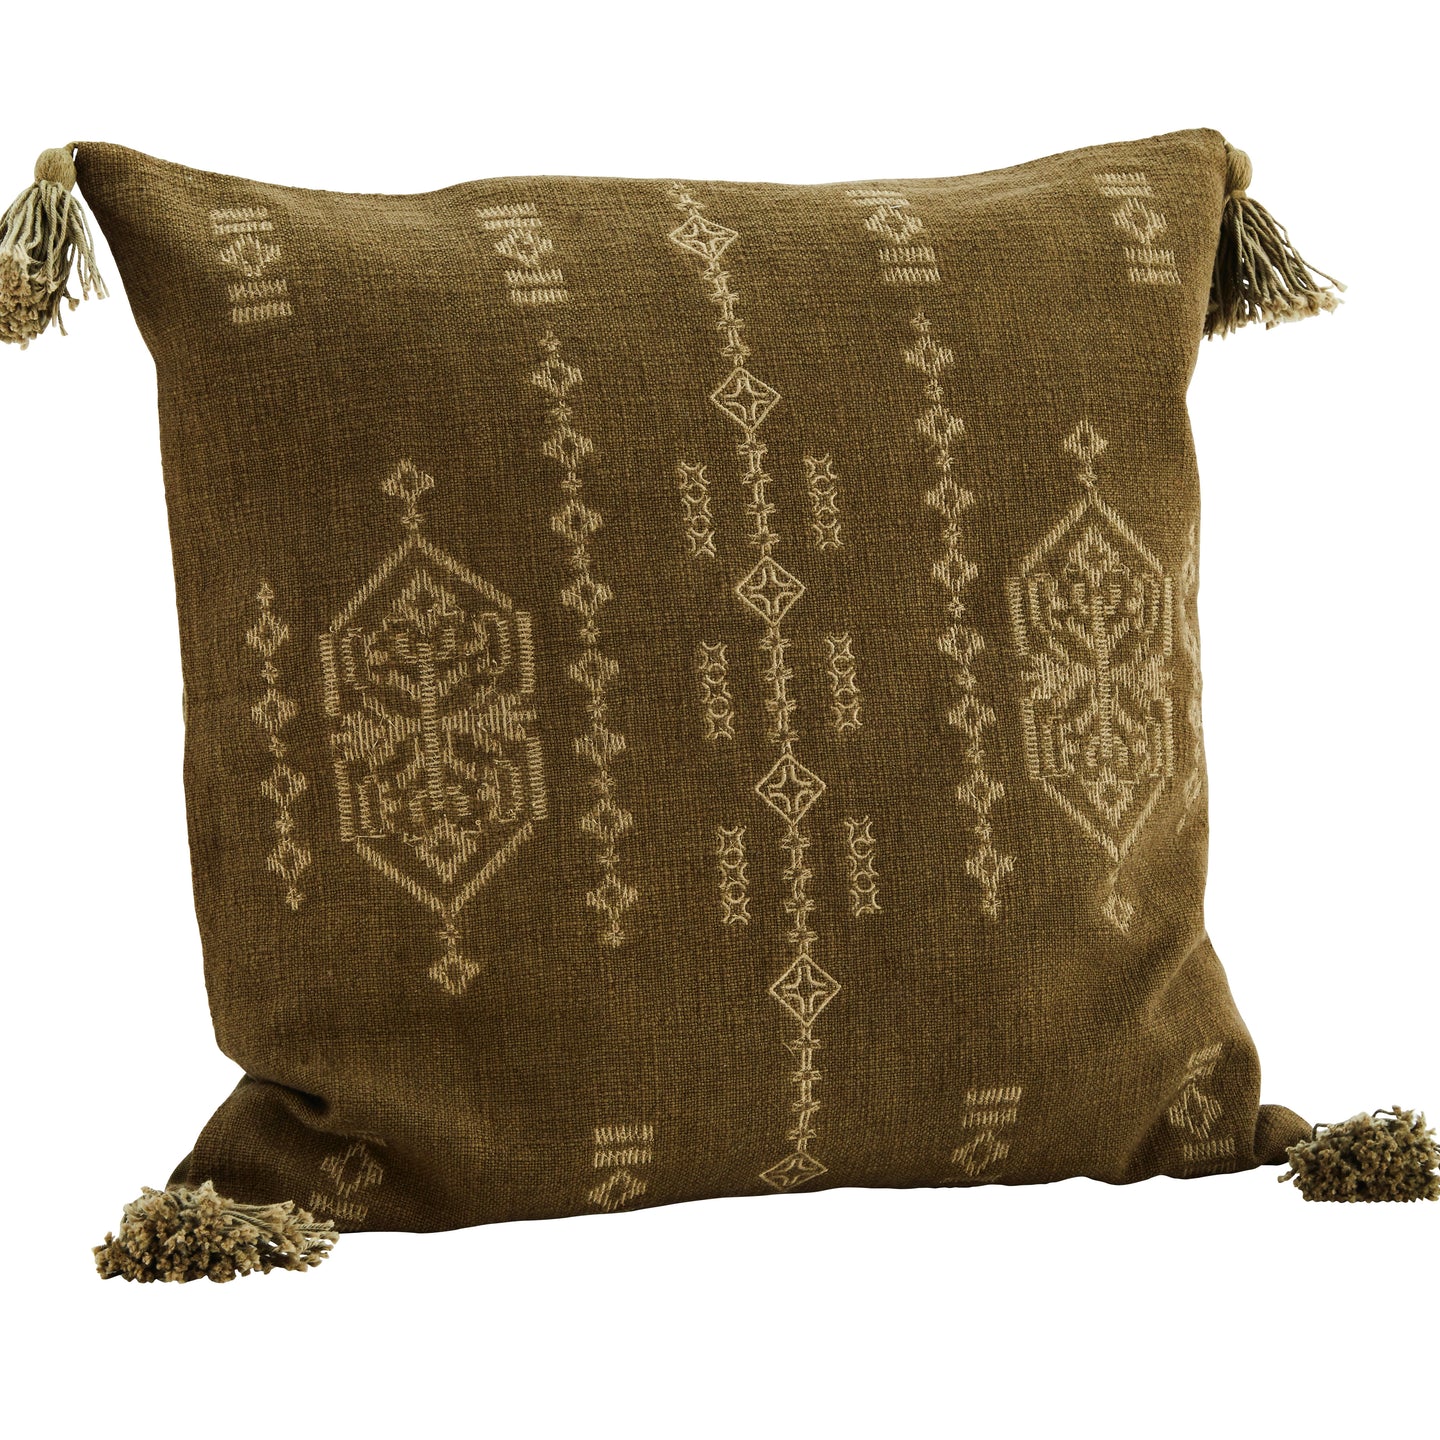 COUSSIN EMBROIDERED CUSHION COVER W/ TASSELS DECORATION